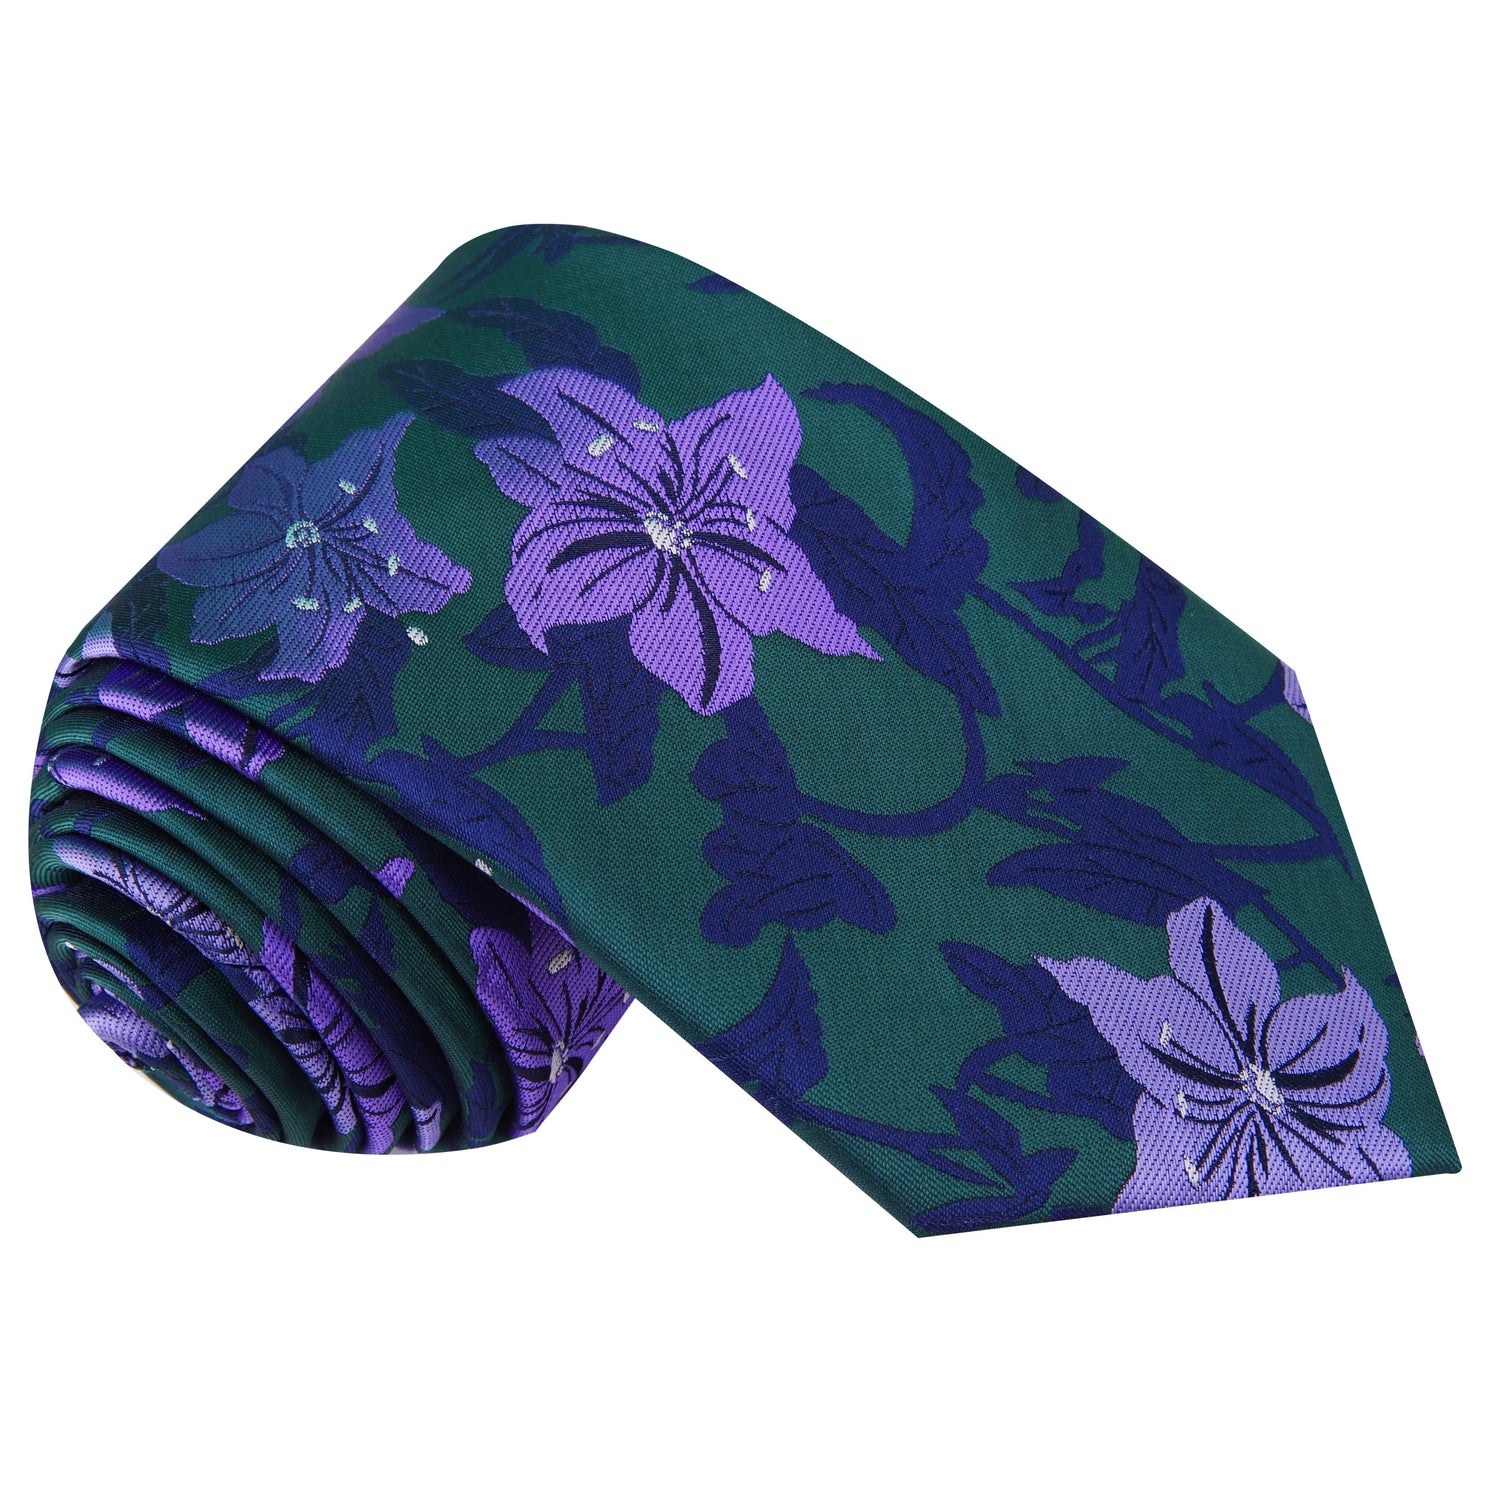 Single Tie: Green, Purple and Blue Floral Tie  